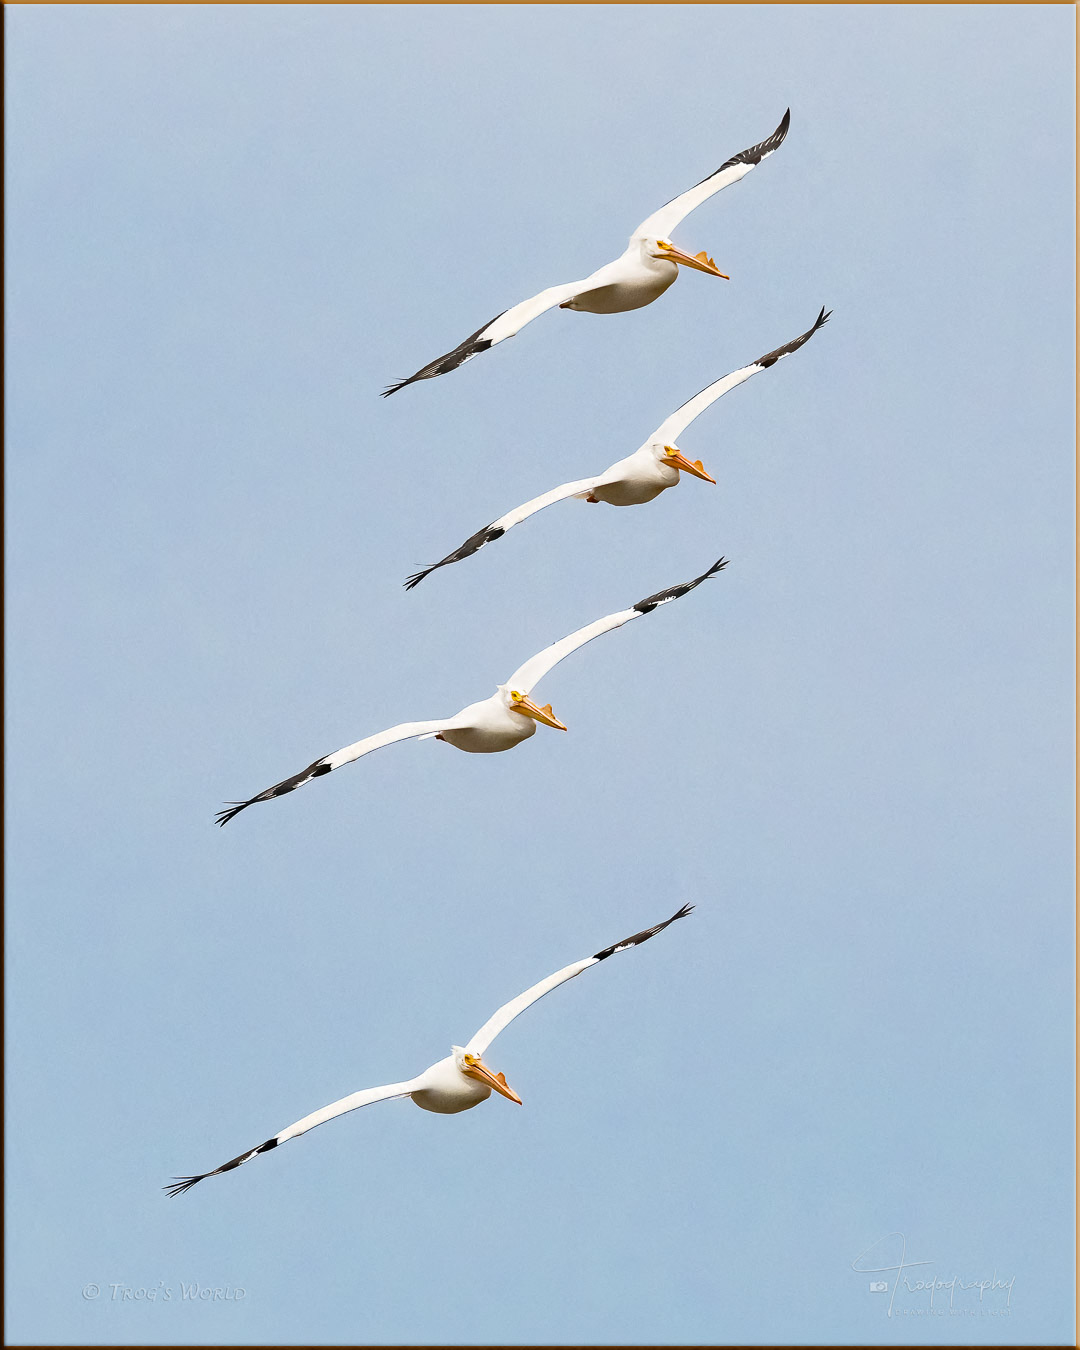 American White Pelicans flying in formation